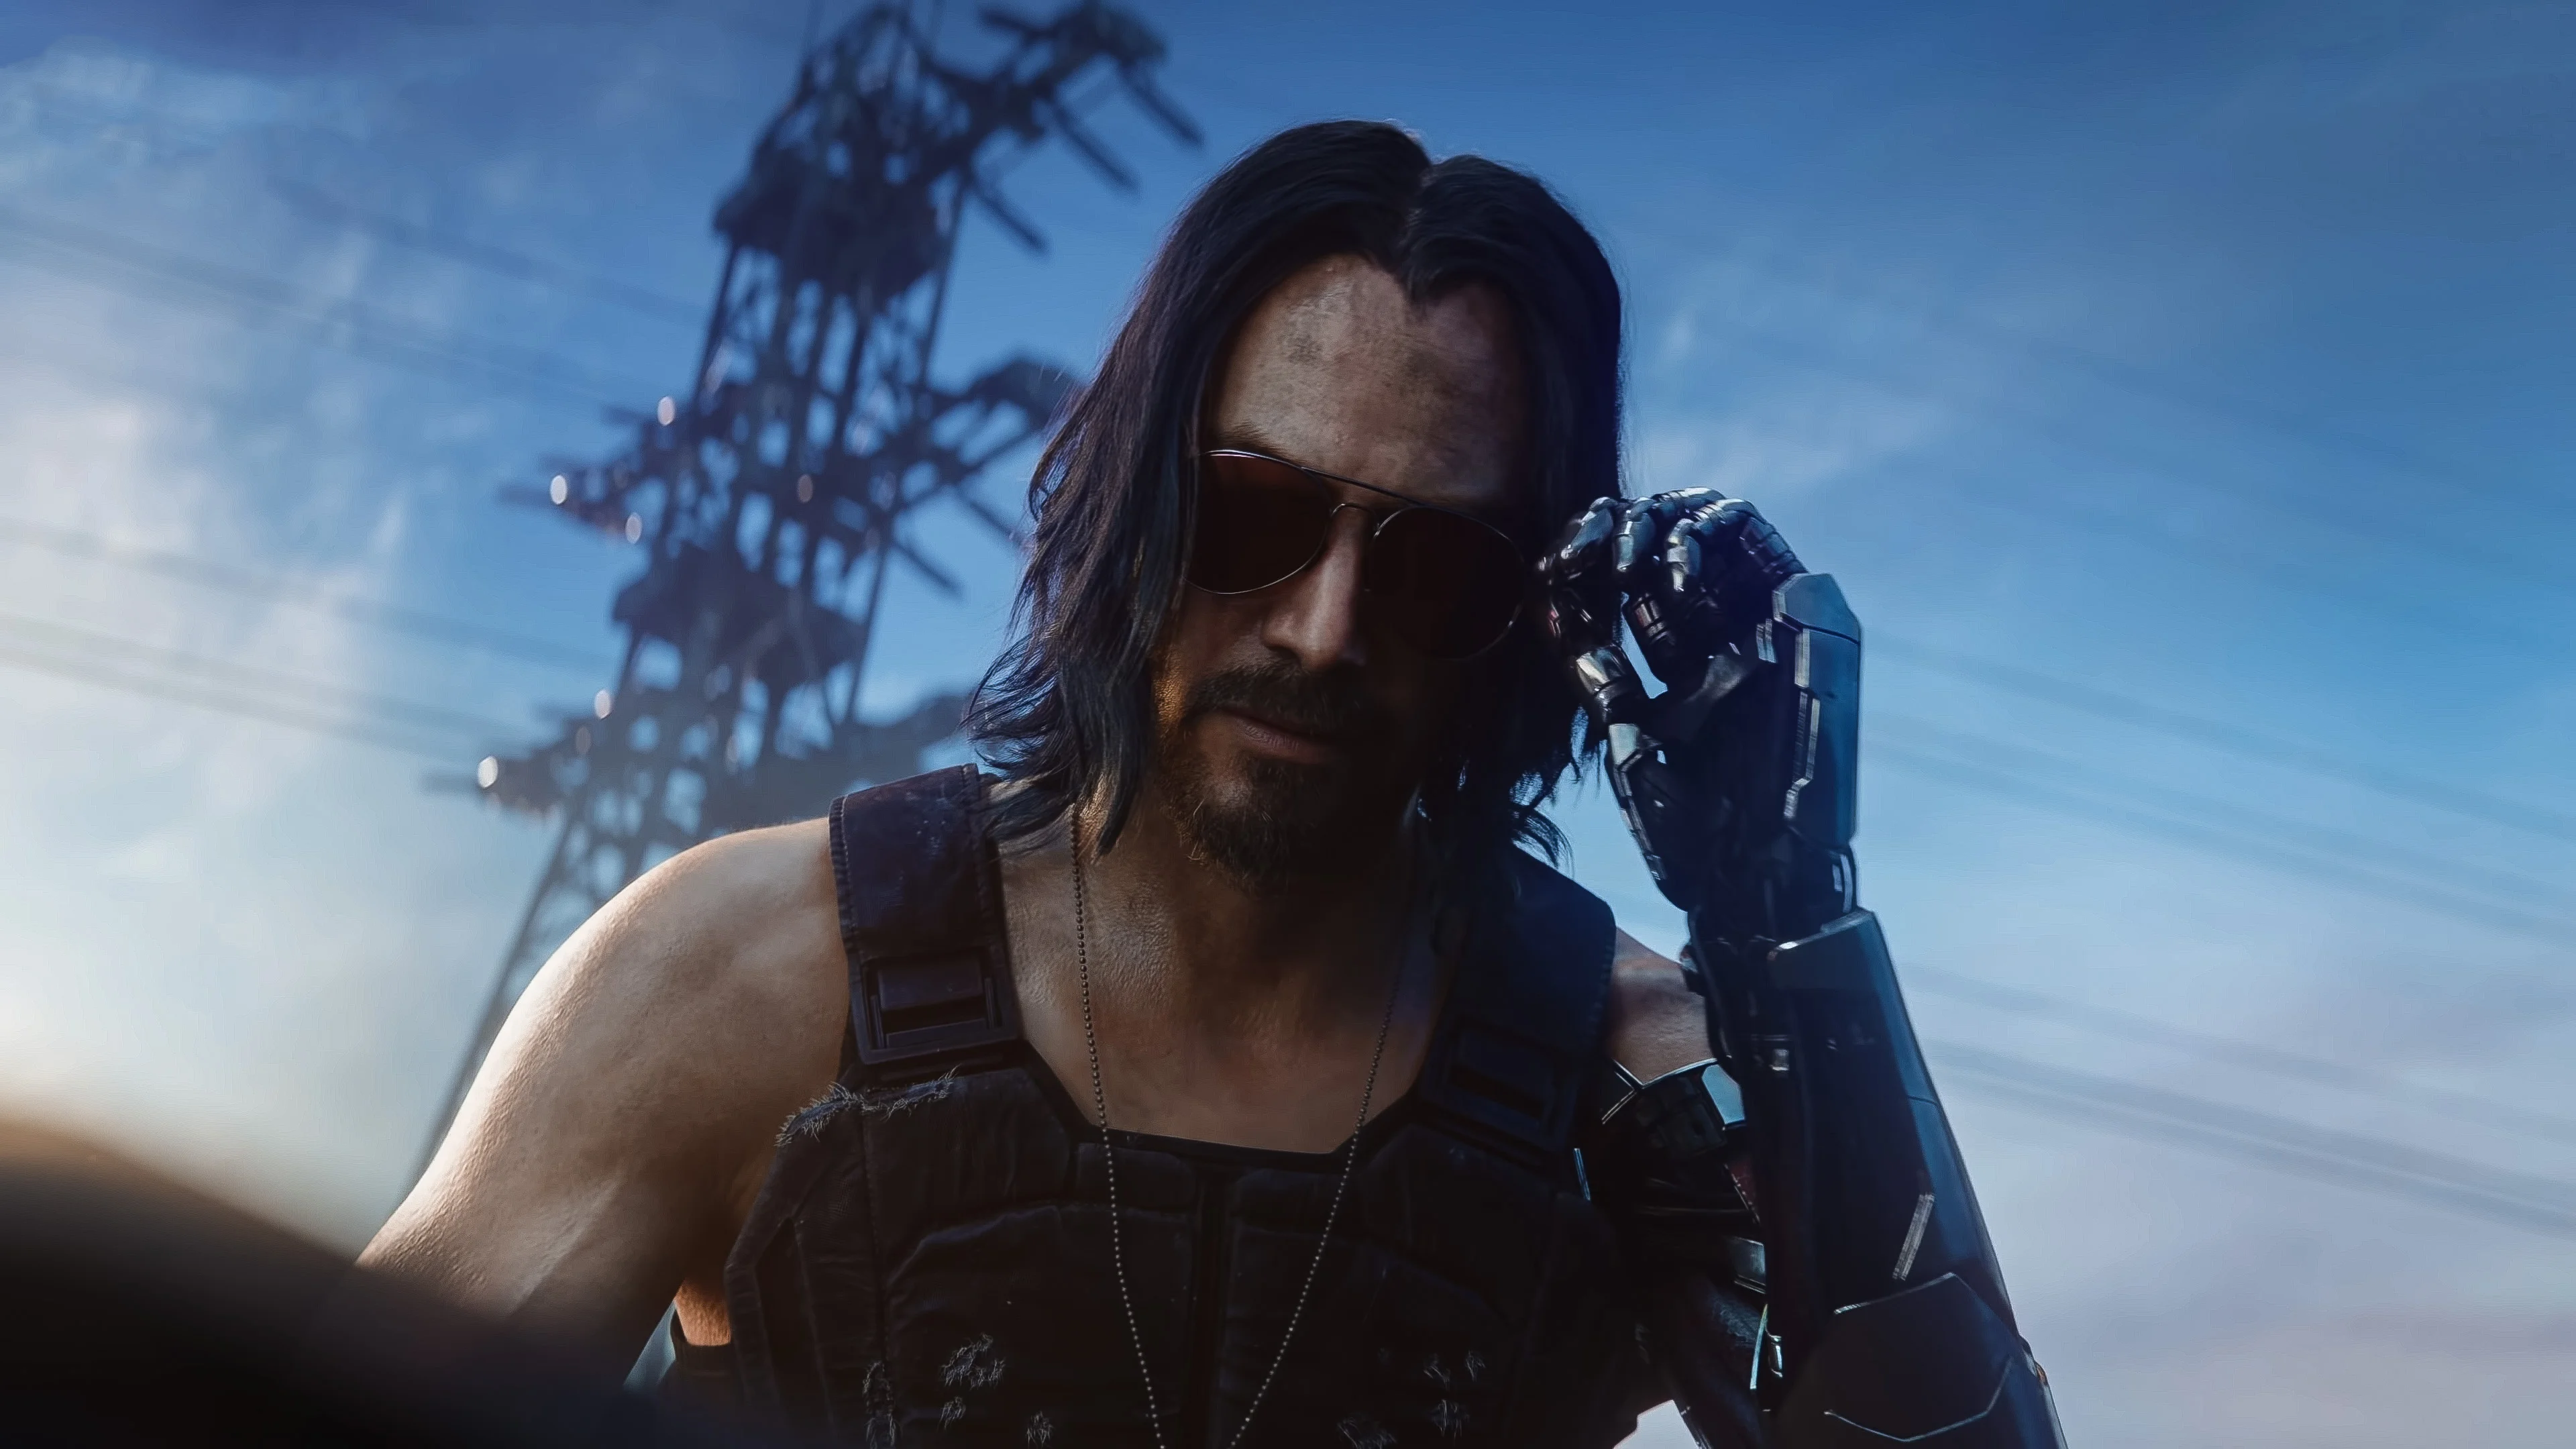 The film adaptation of Cyberpunk 2077 will not appear soon